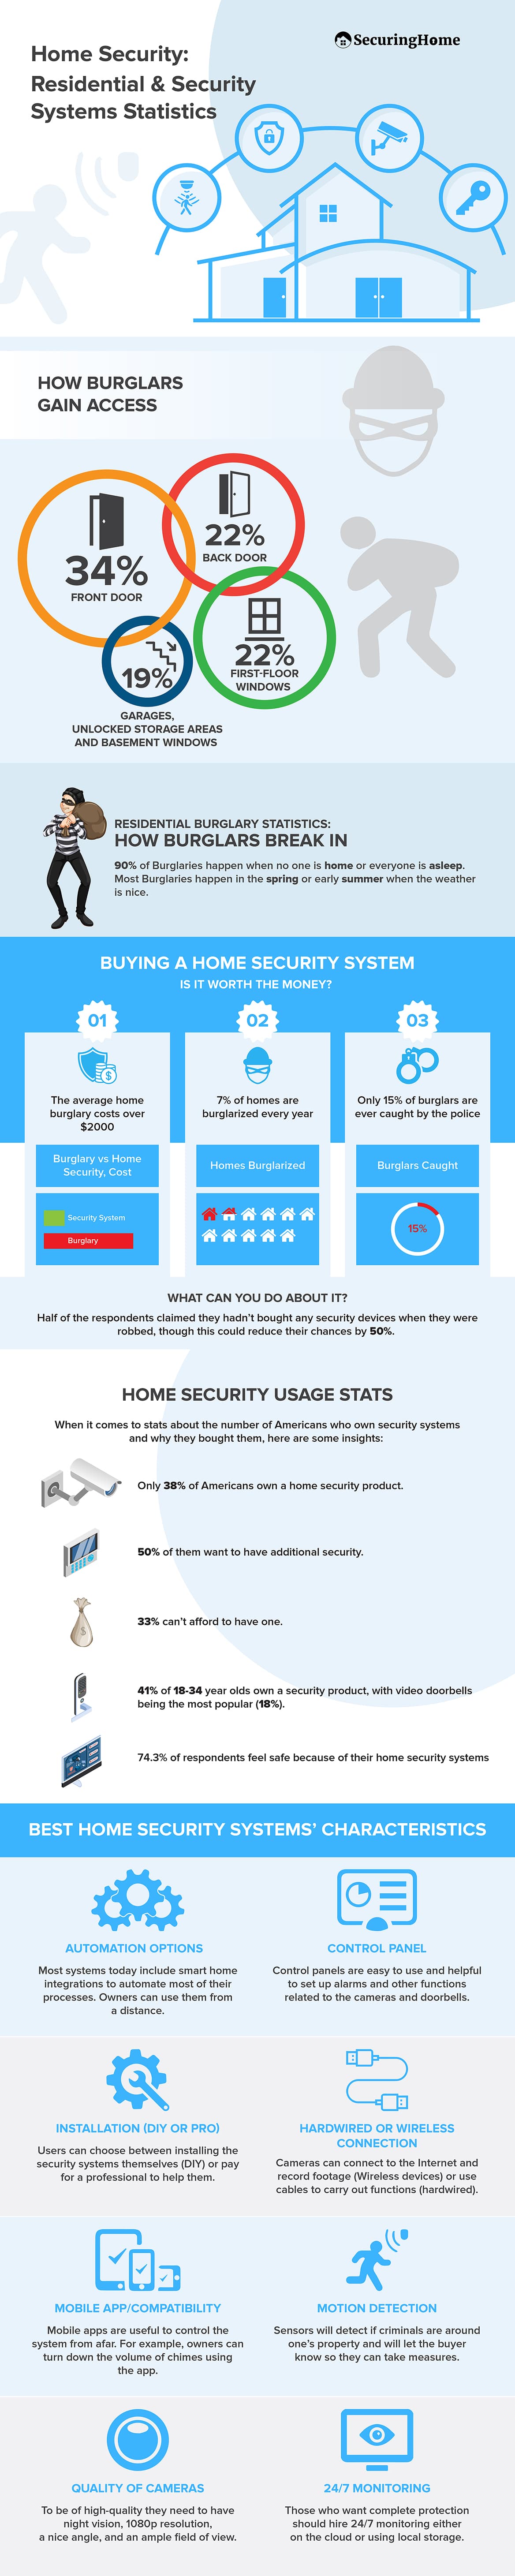 Home Security: Residential & Security Systems Statistics